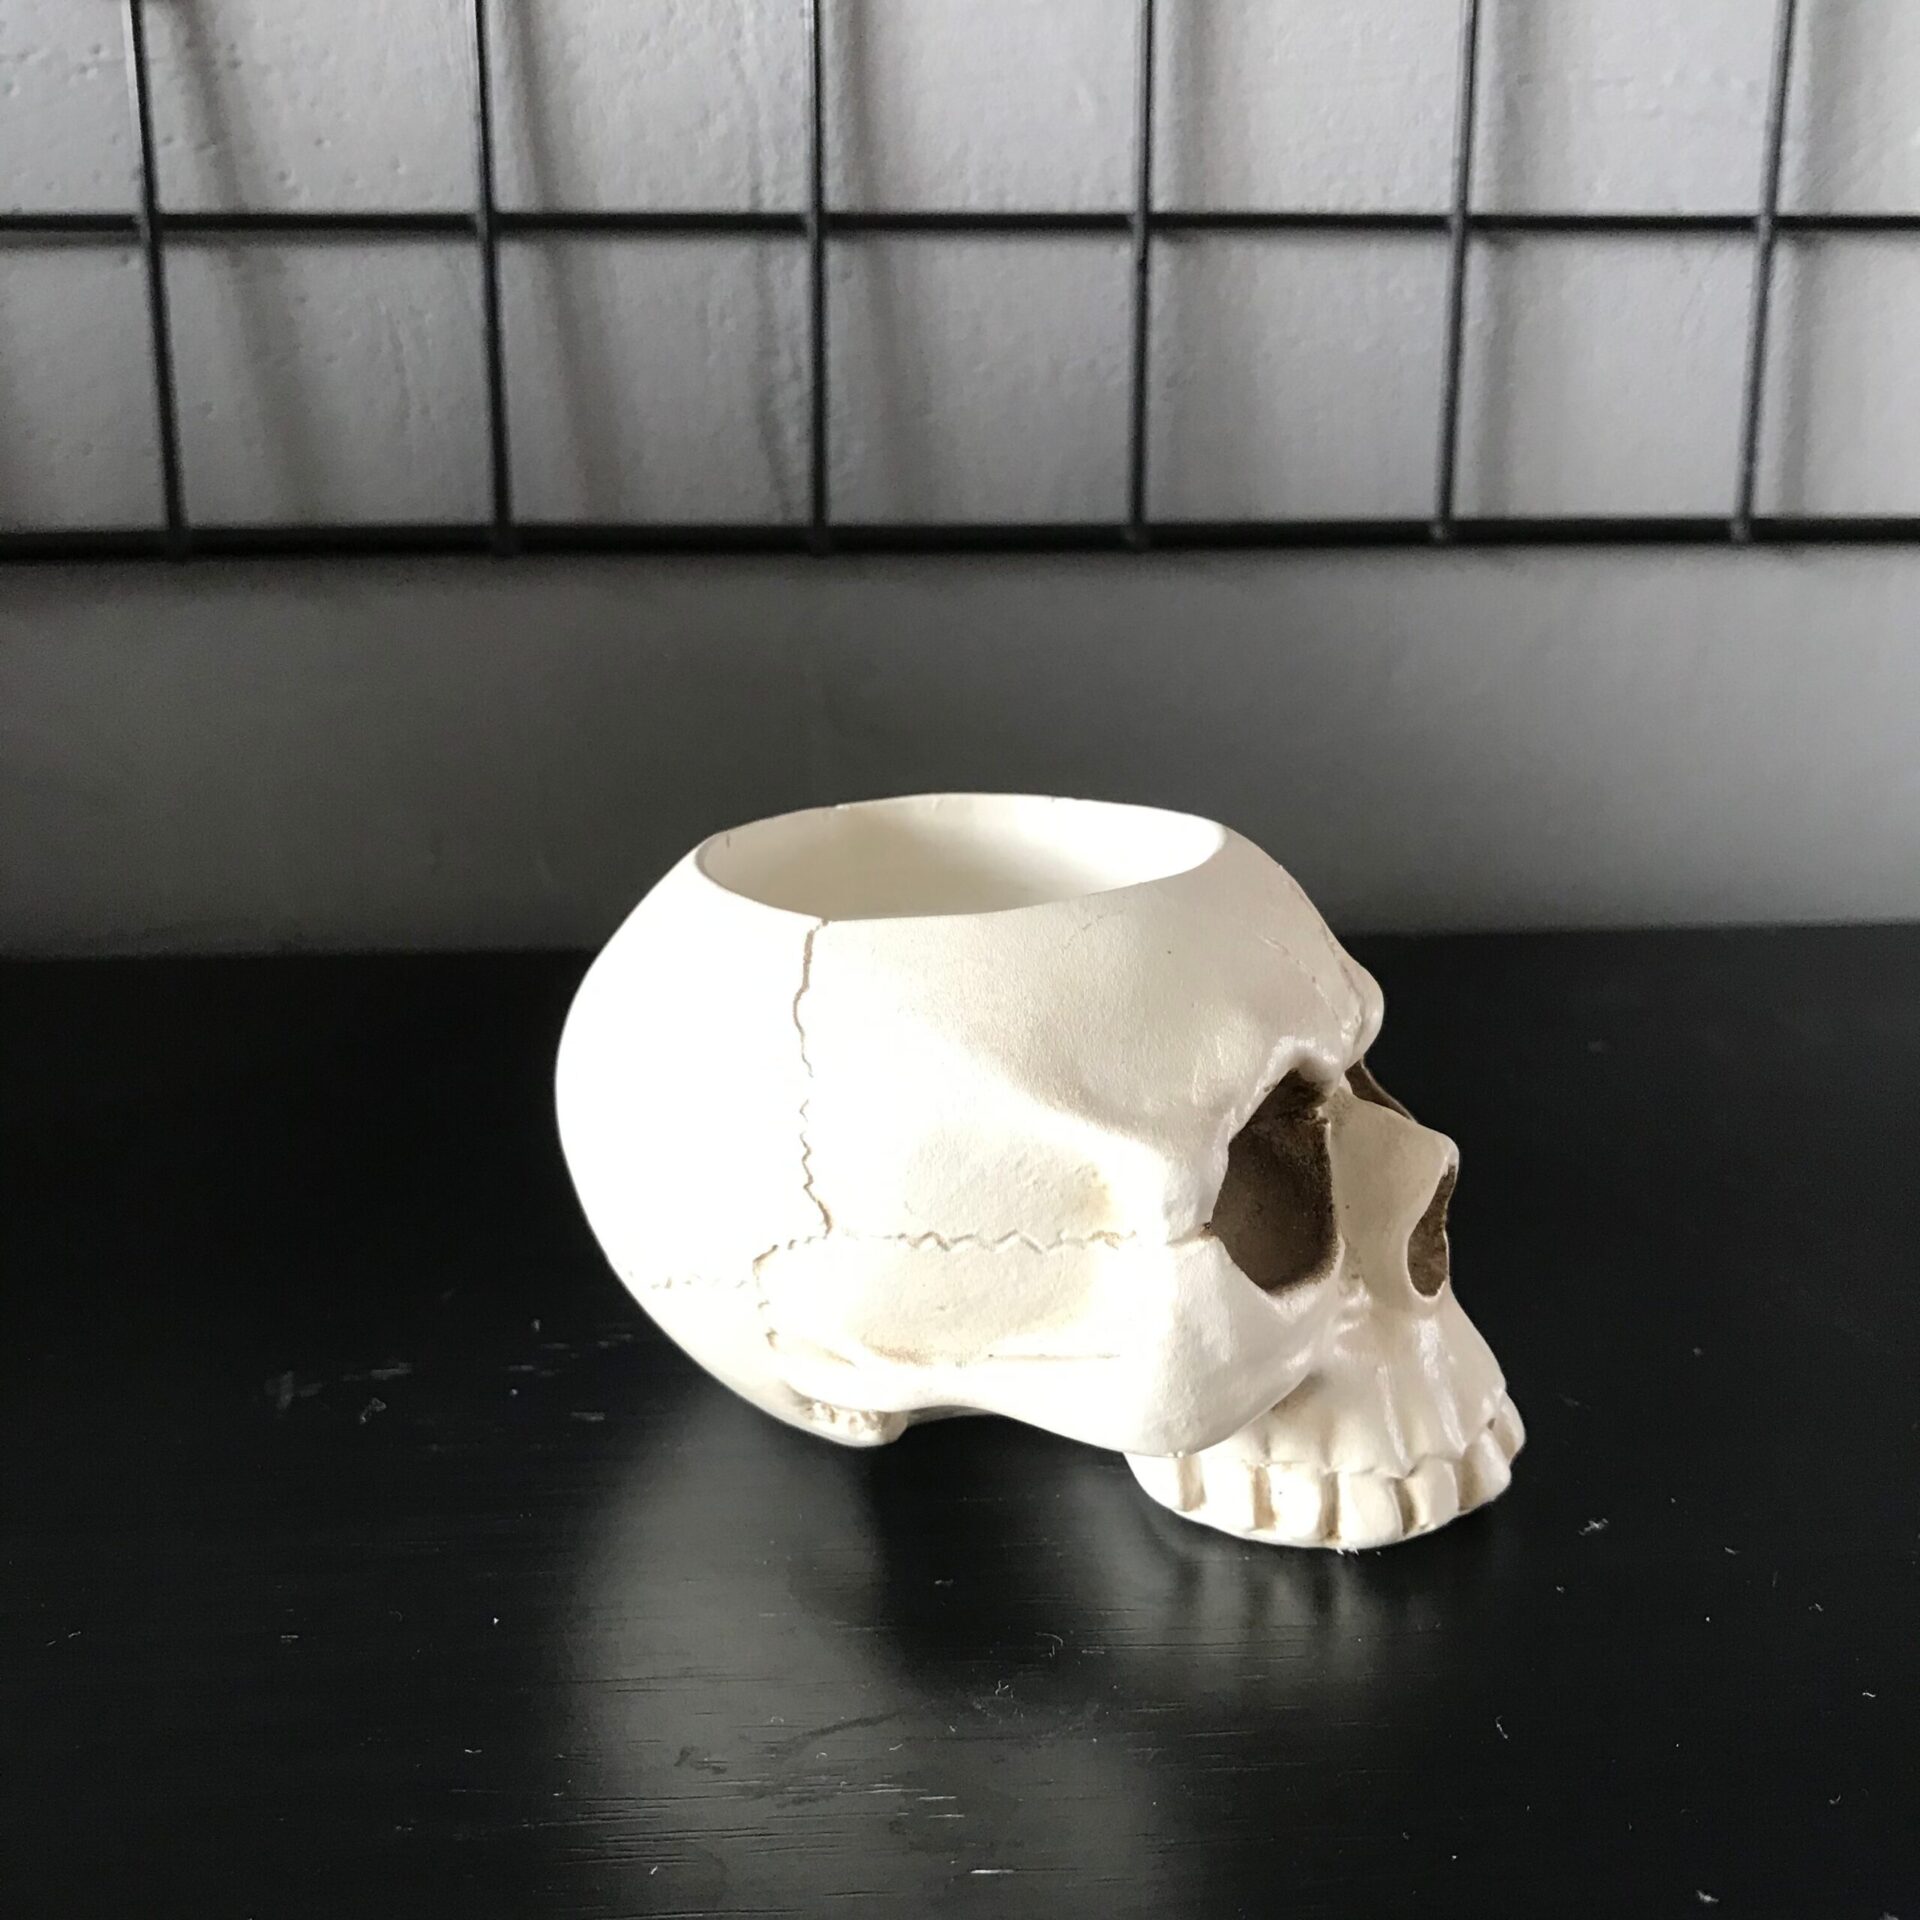 Small Skull Head Candle Holder